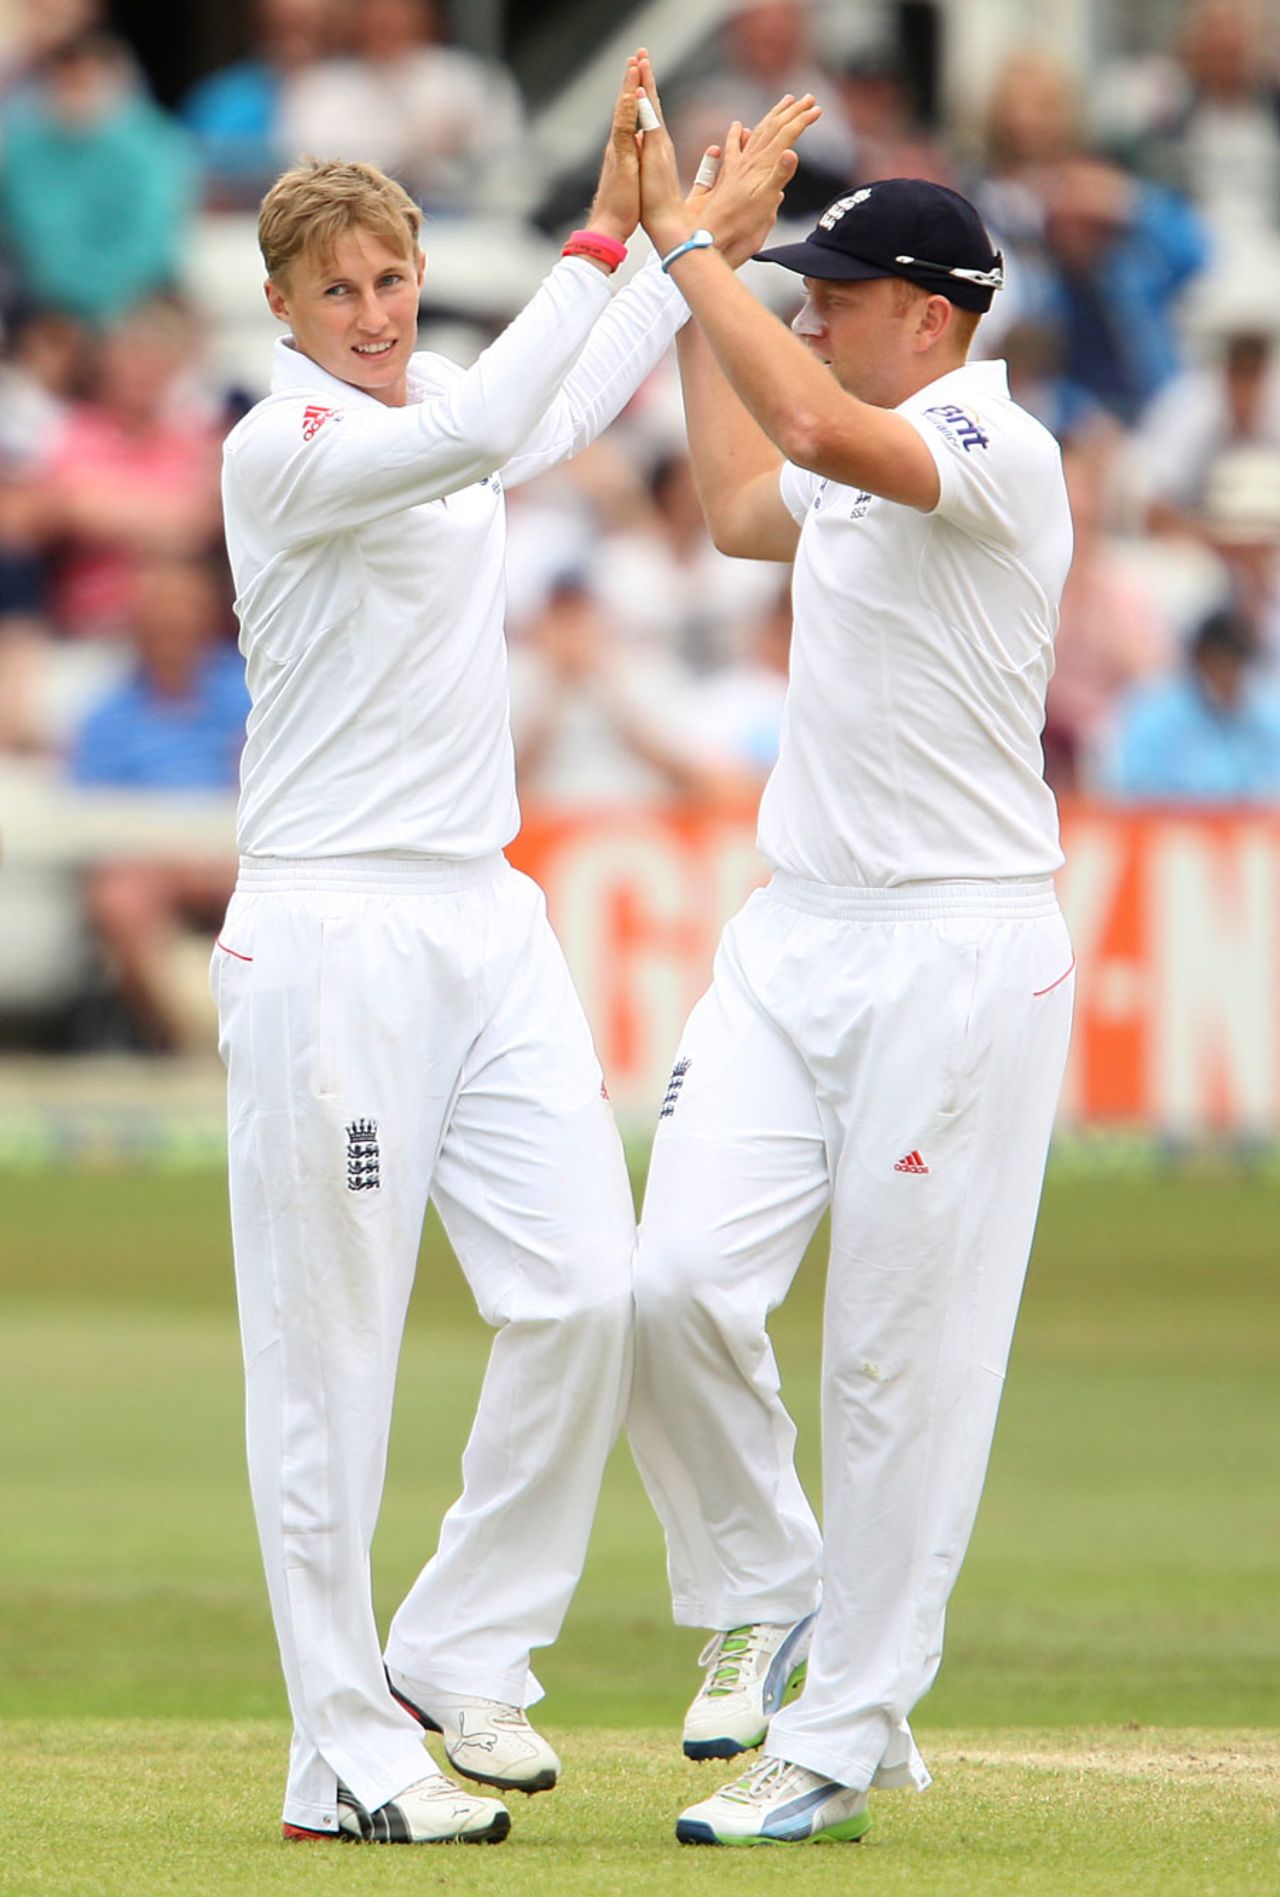 Joe Root celebrates a wicket with Jonny Bairstow, Essex v England, 2nd day, Chelmsford, July 1, 2013